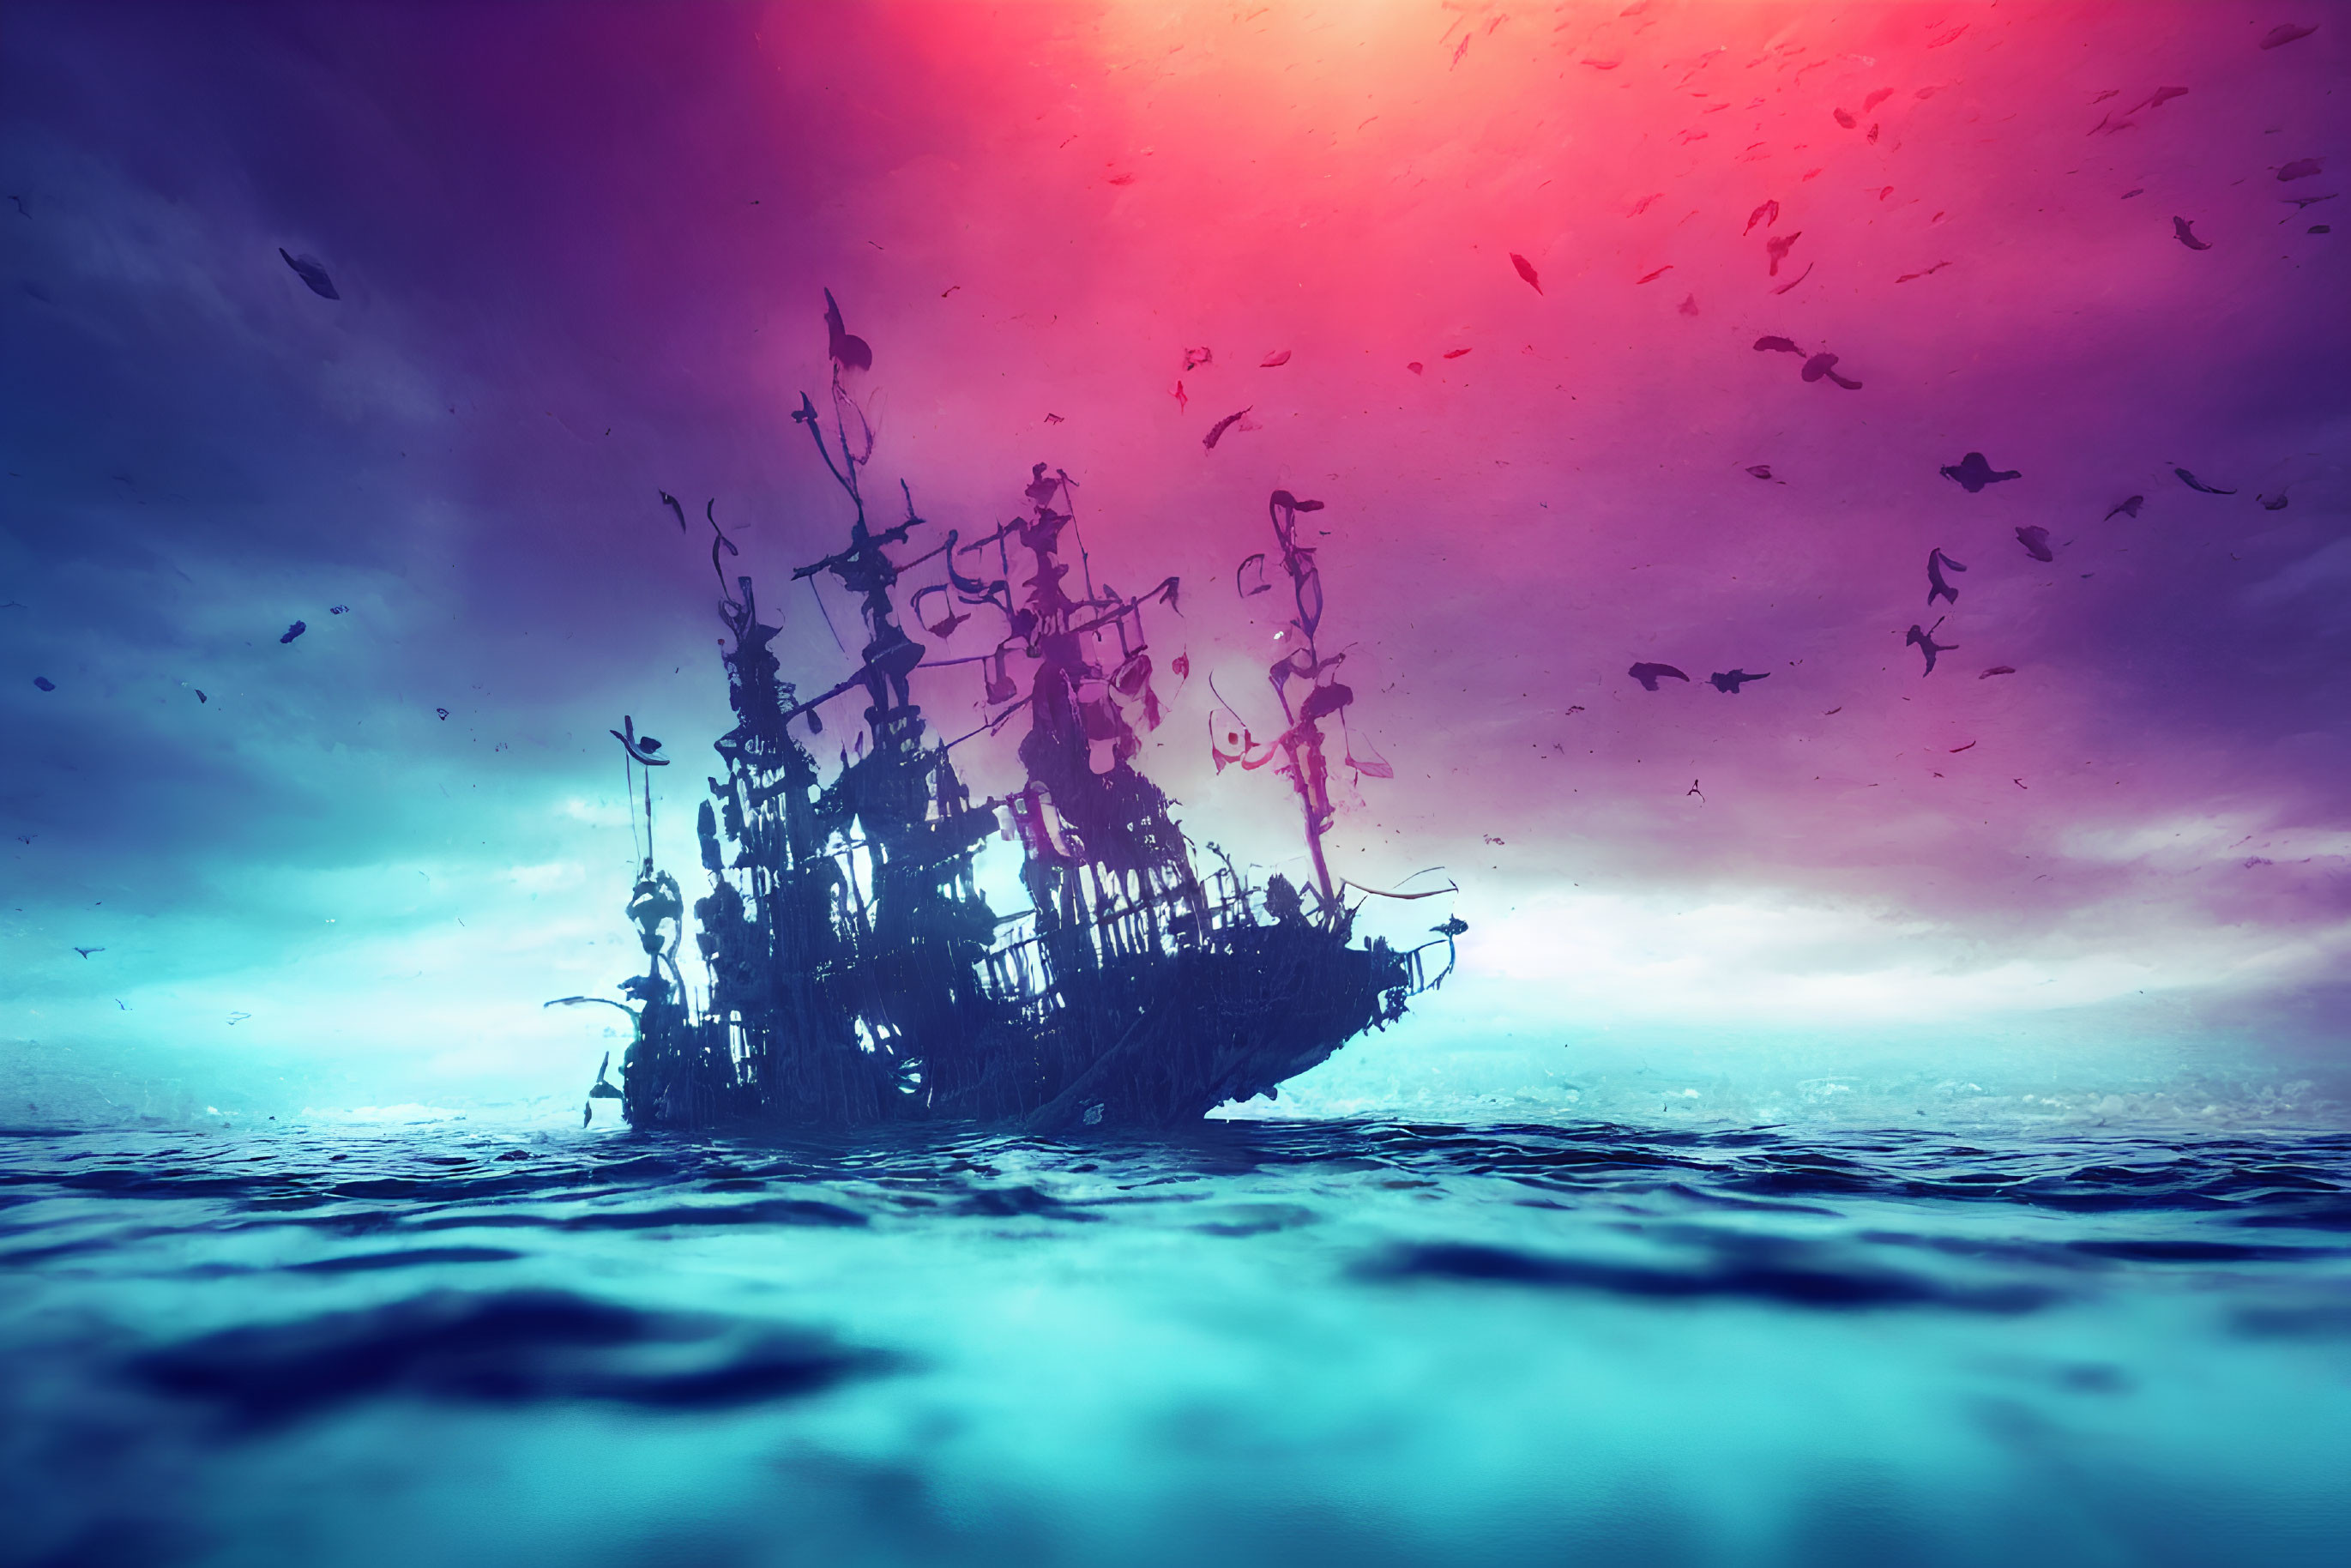 Ghostly ship with tattered sails in dramatic purple and red sky above calm sea